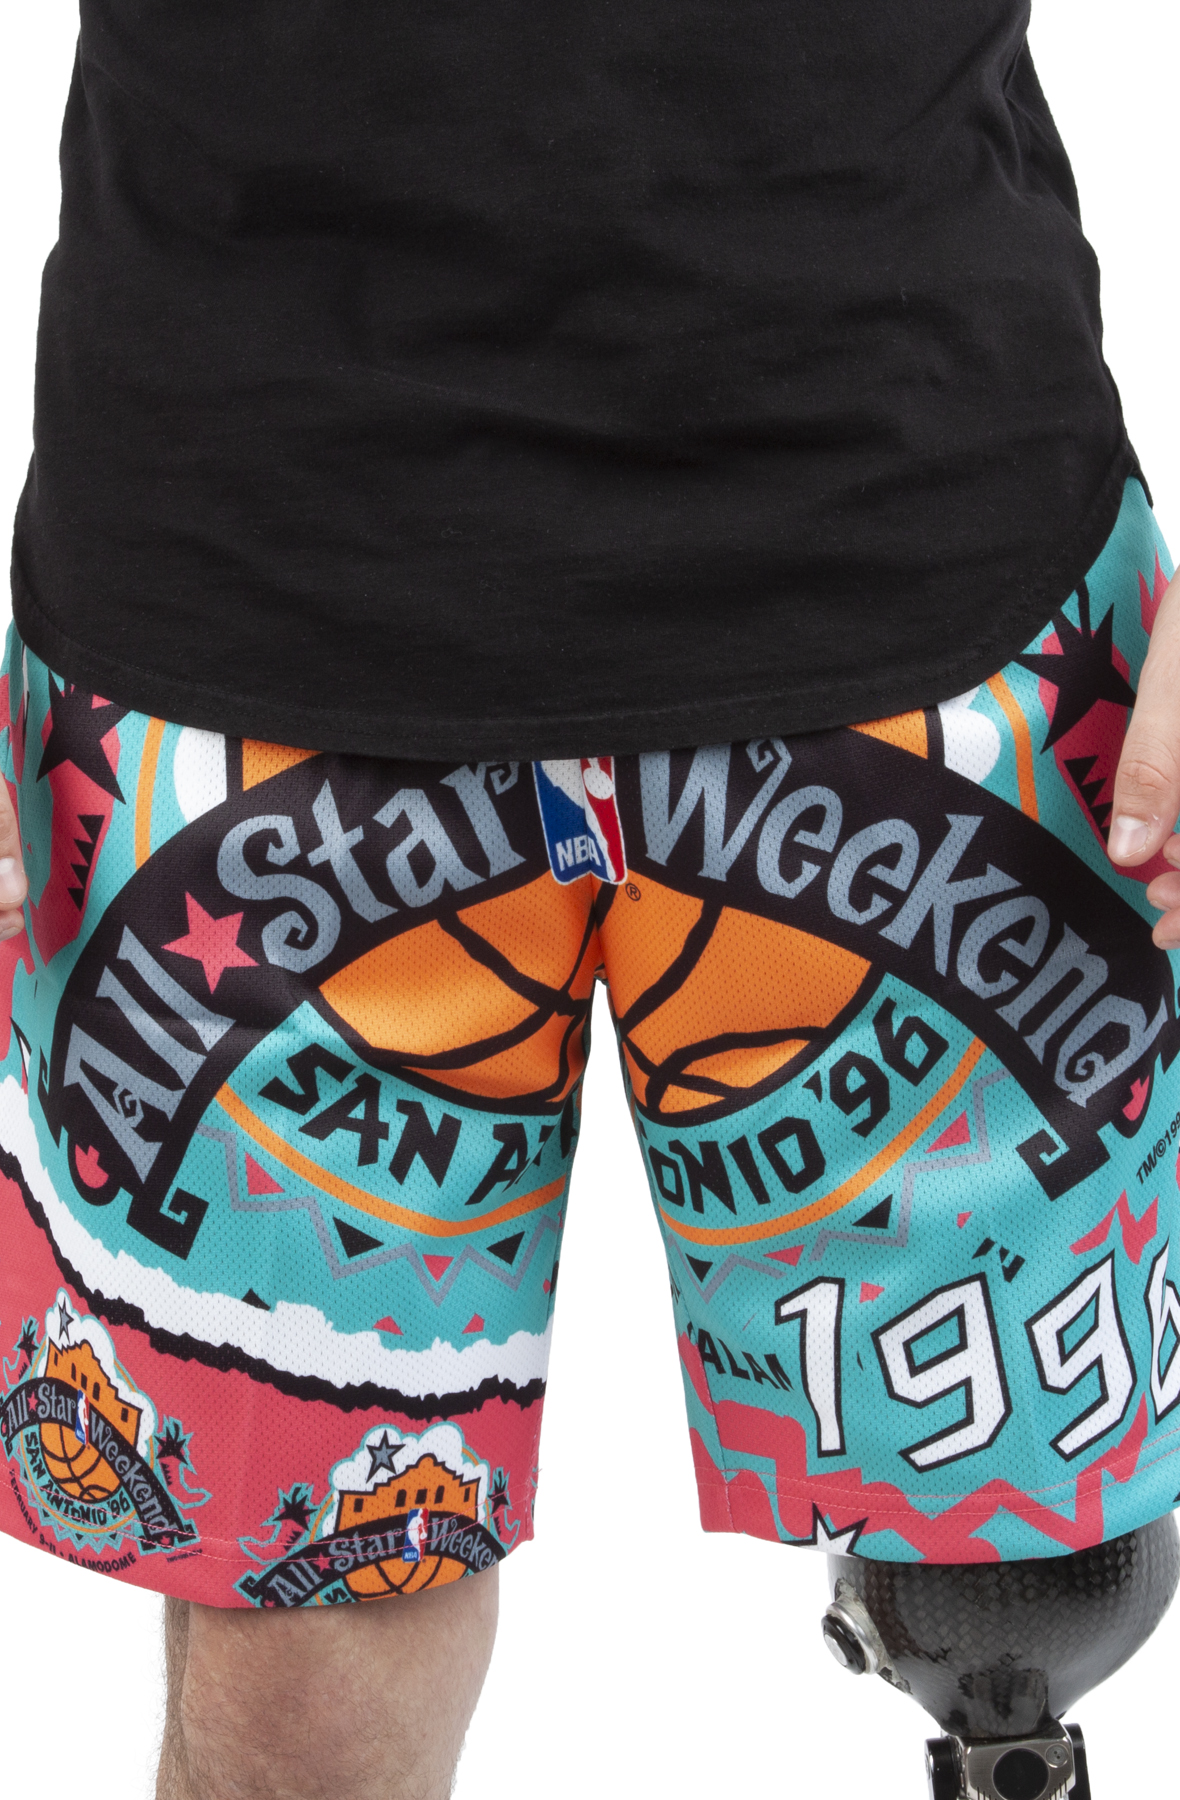 Jumbotron 2.0 Sublimated Shorts All Star 1996-97 - Shop Mitchell & Ness  Shorts and Pants Mitchell & Ness Nostalgia Co.